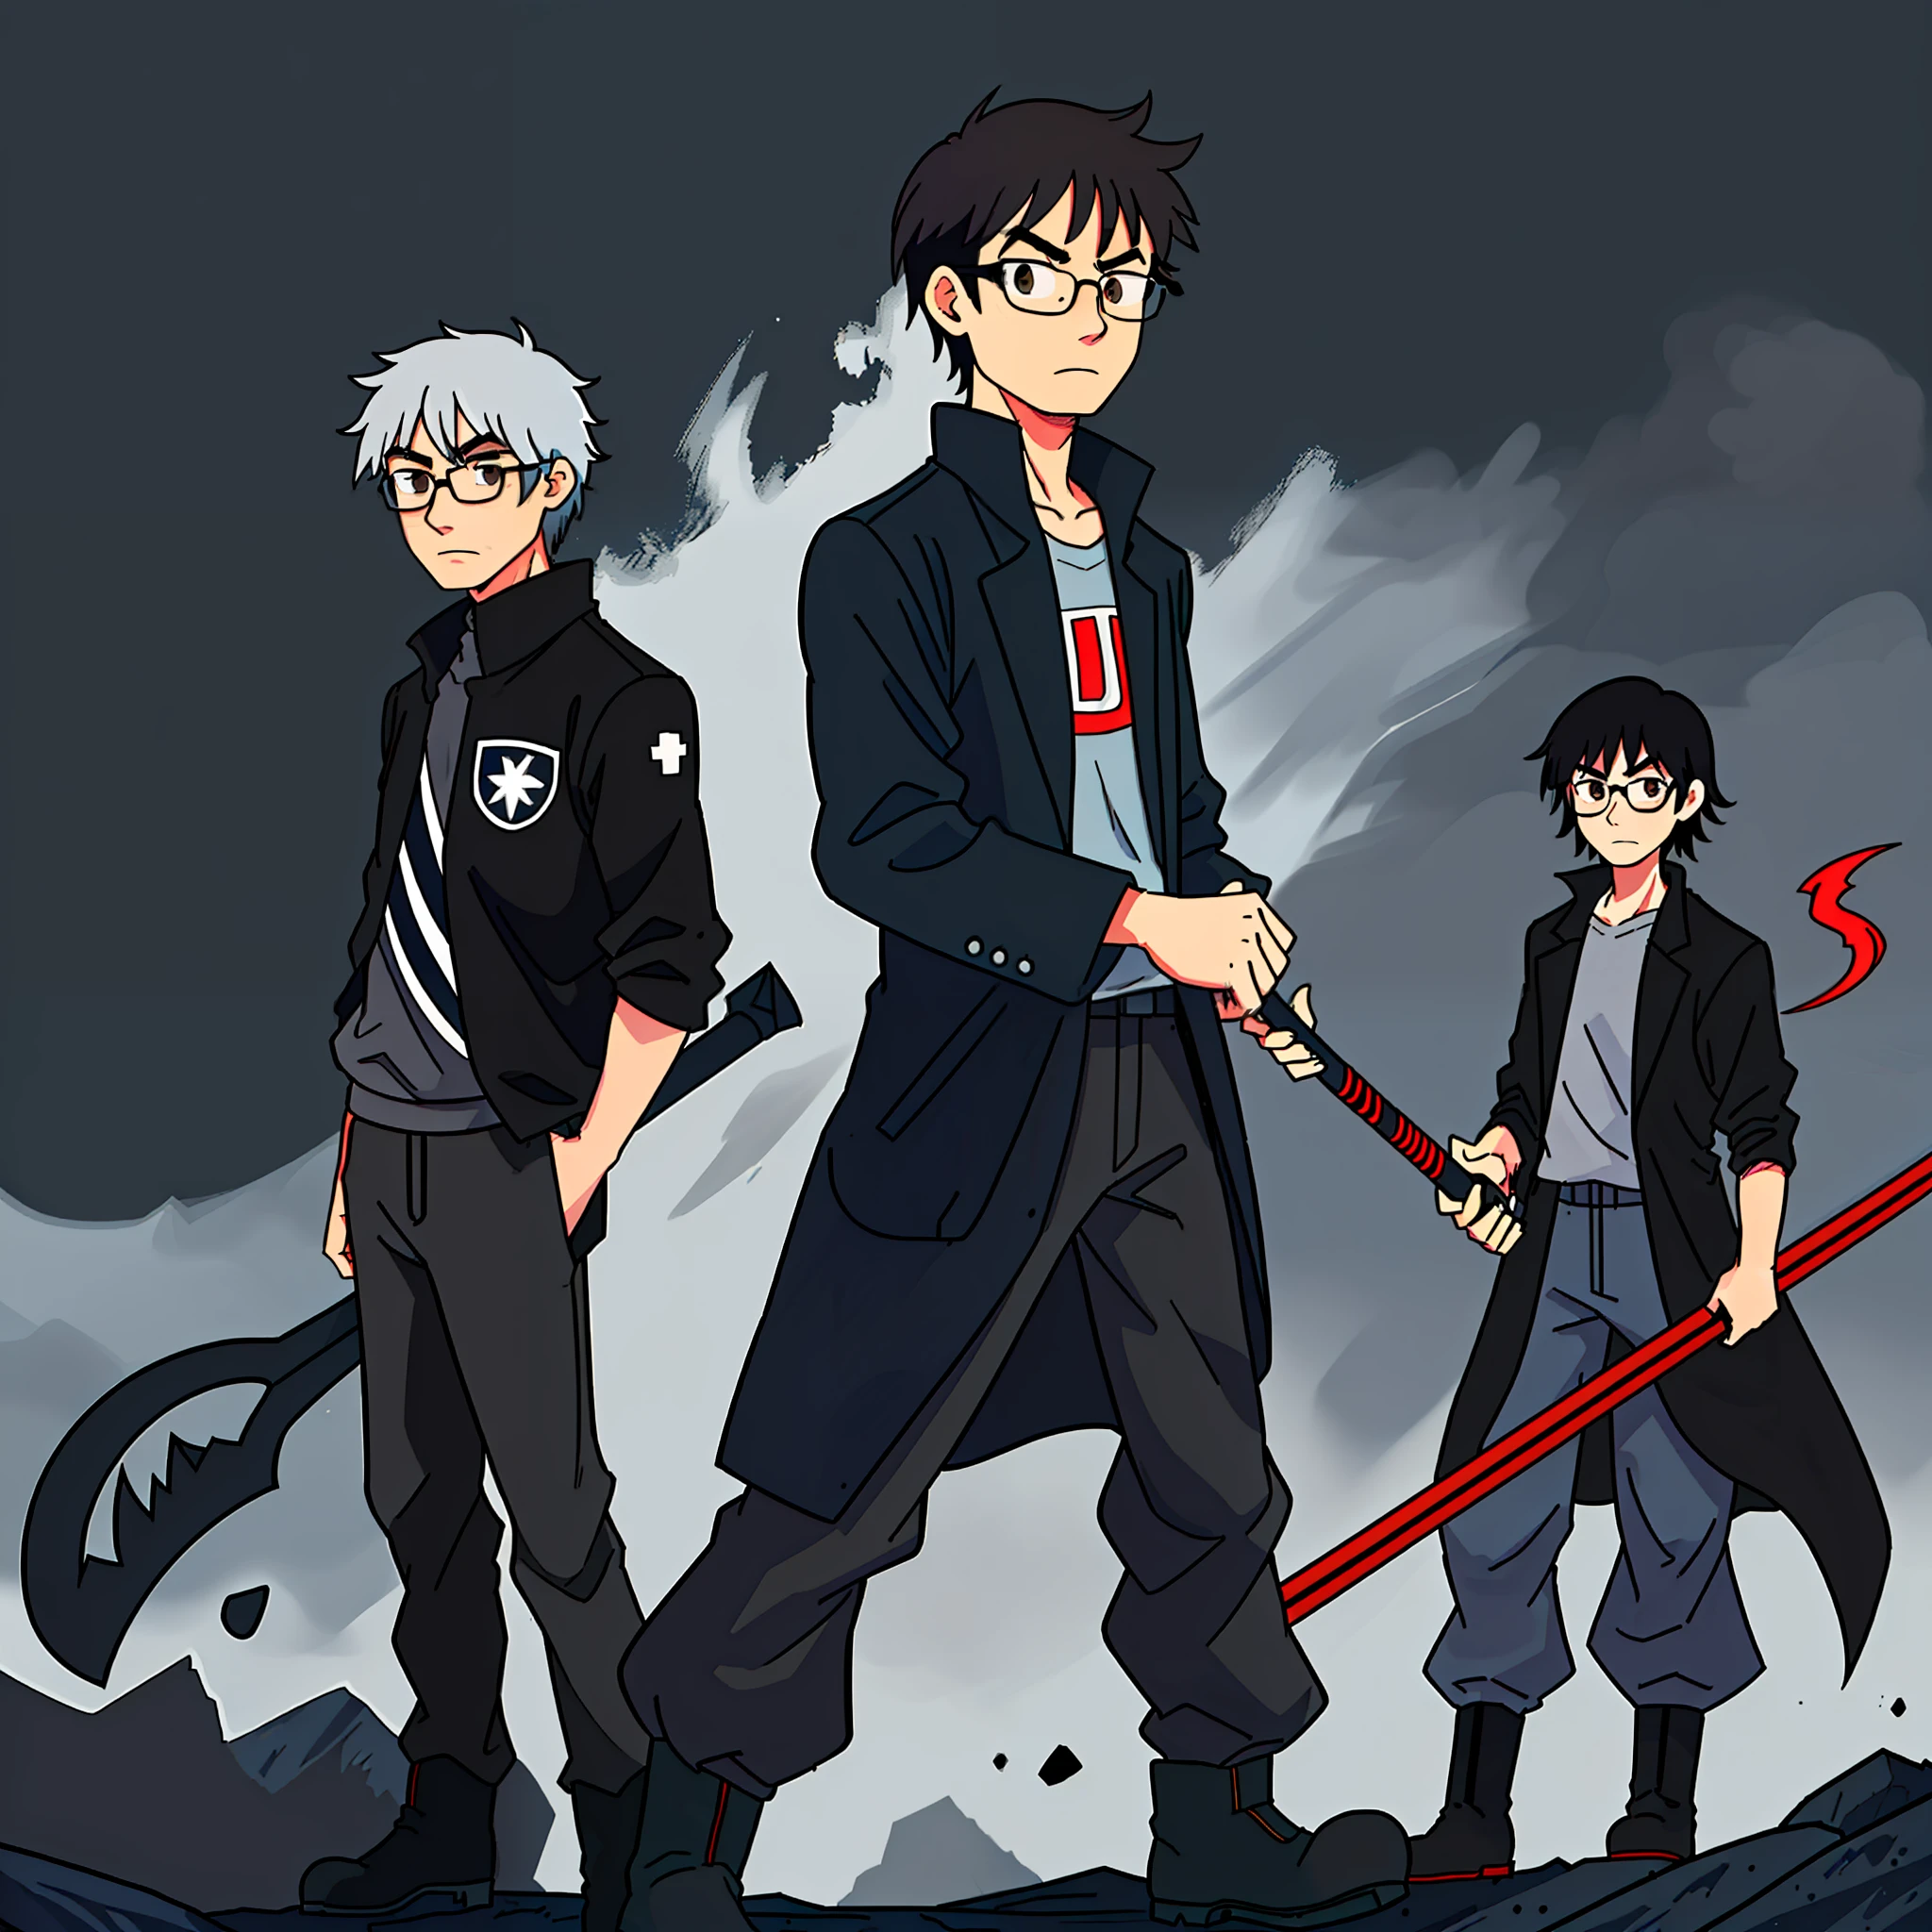 ((best quality)), ((detailed1,4)), ((HQ)), ((manga)) image of a man vom black overduct with short sleeves, gray sweatshirt under overcoat, black pants with dark blue stripe but sides, small red square glasses, white half large hair, holding a scythe, brown eyes, wearing boots. Battle pose. Dark landscape destroyed